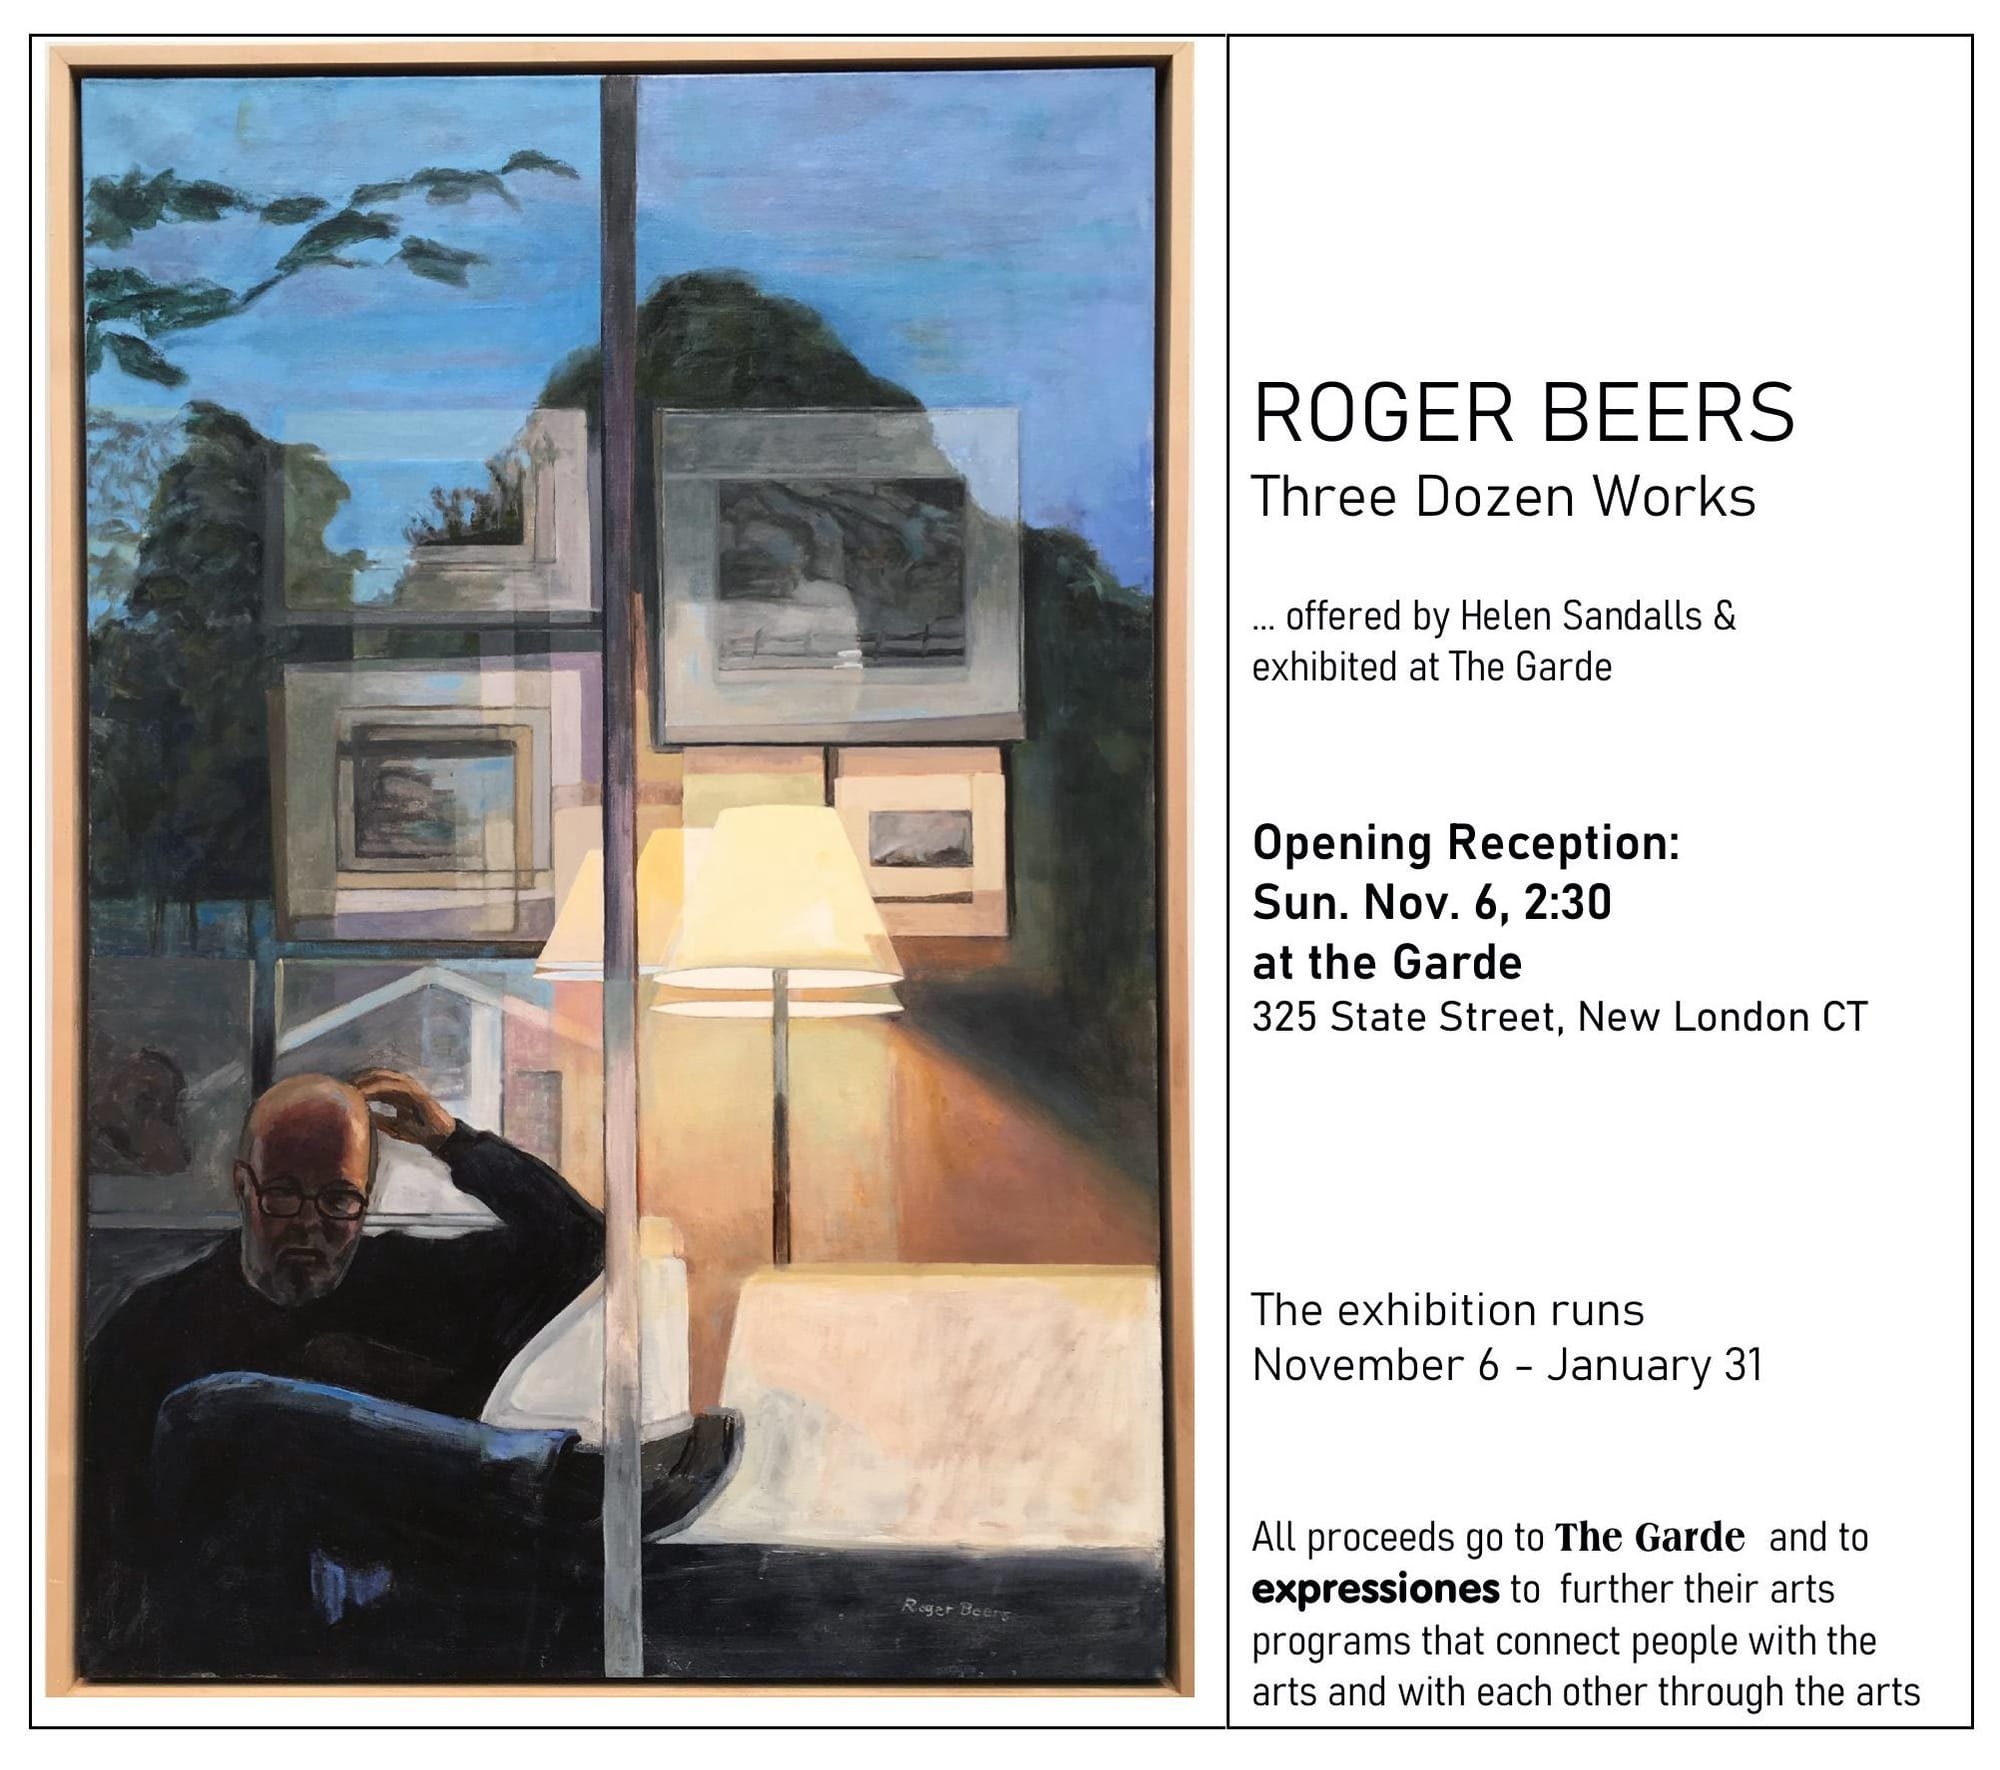 Roger Beer's Exhibition and fundraising at The Garde